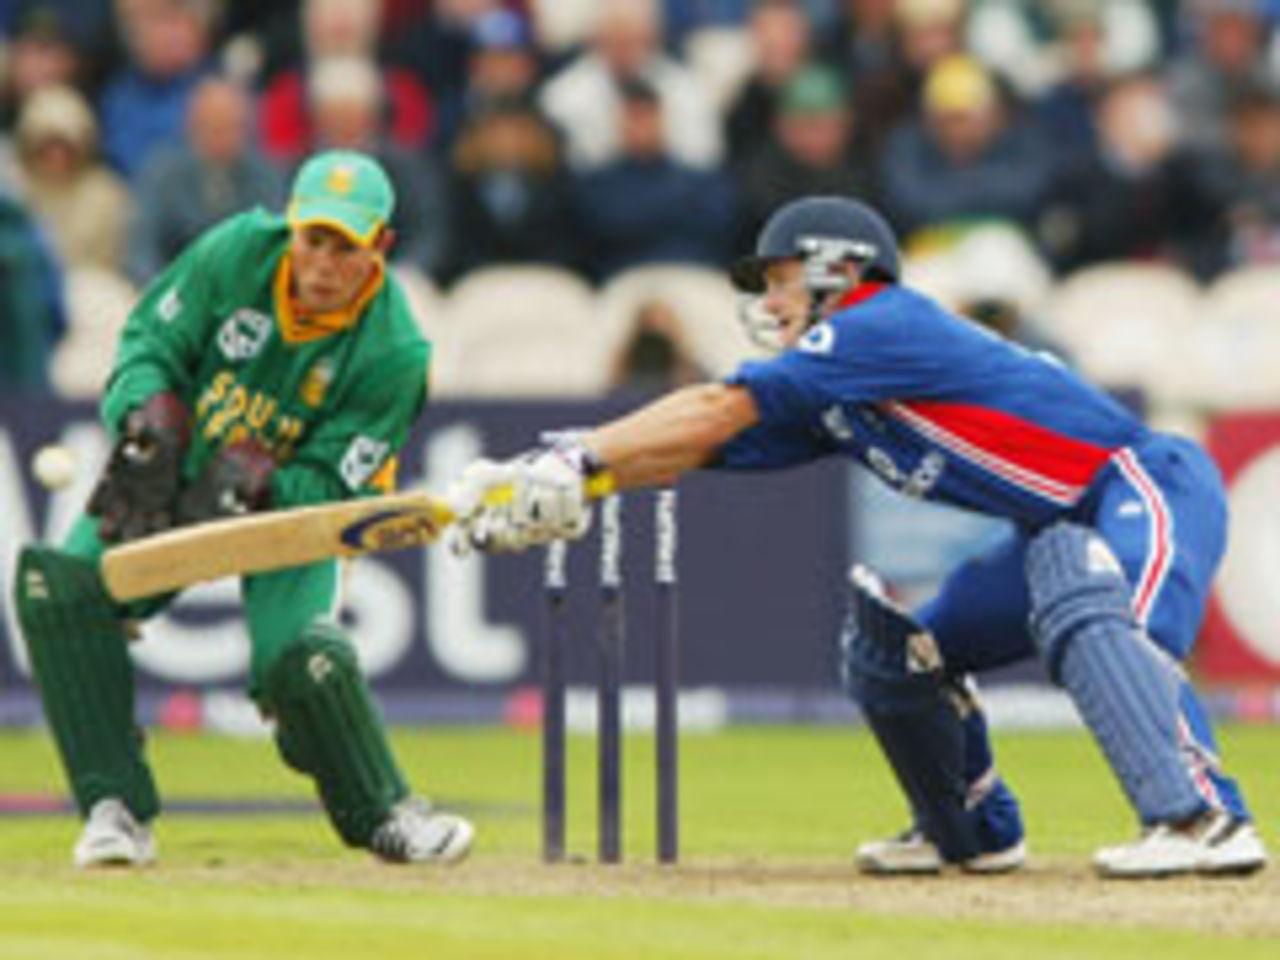 Chris Read cuts during his quickfire 30 not out against South Africa at Old Trafford